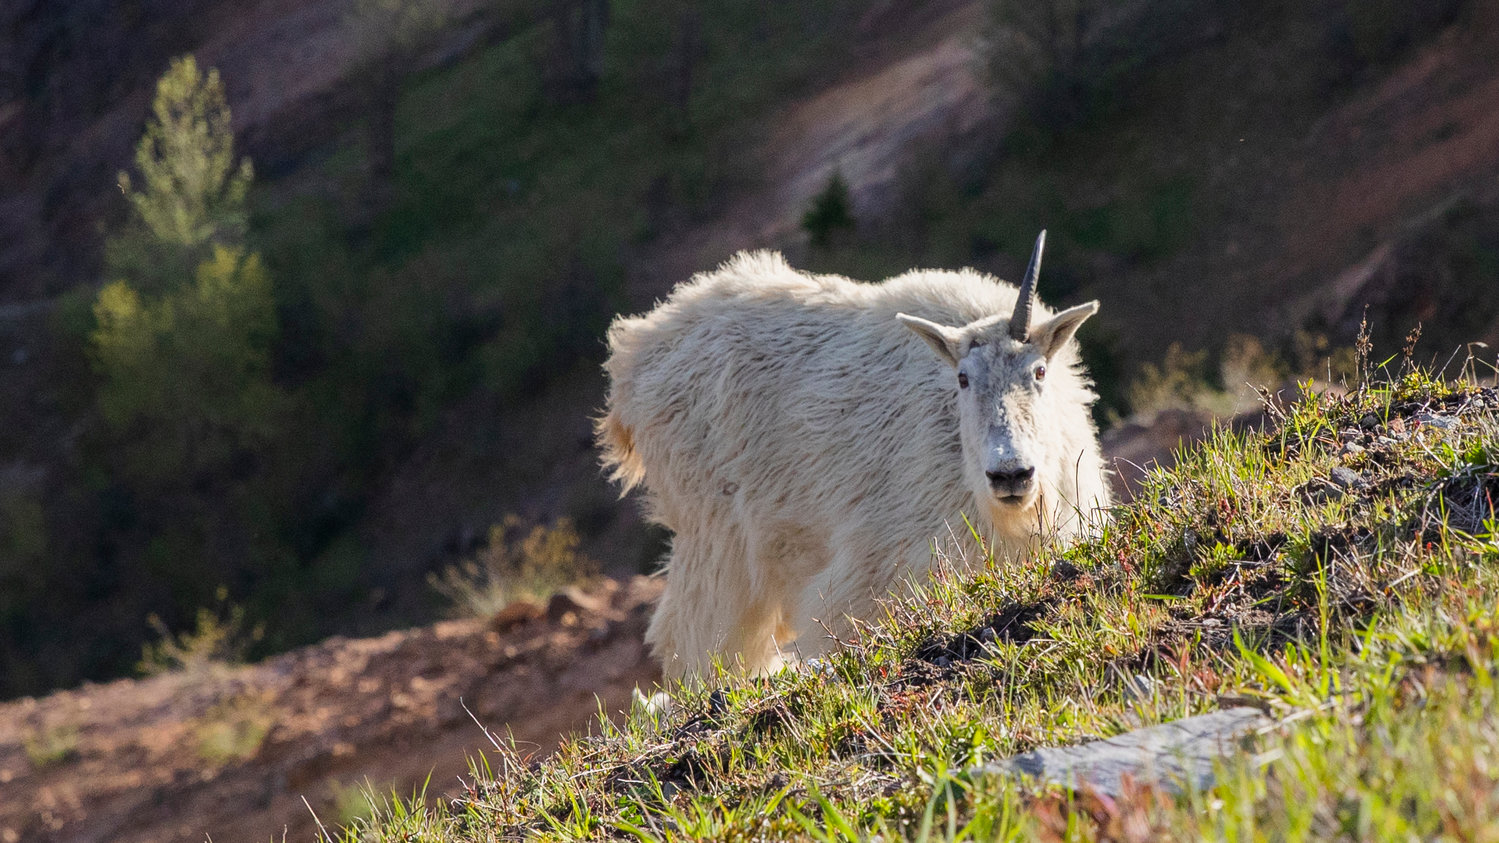 A mountain goat with a single horn looks on from below a trail in the Mount Margaret Backcountry in the Gifford Pinchot National Forest on Wednesday.